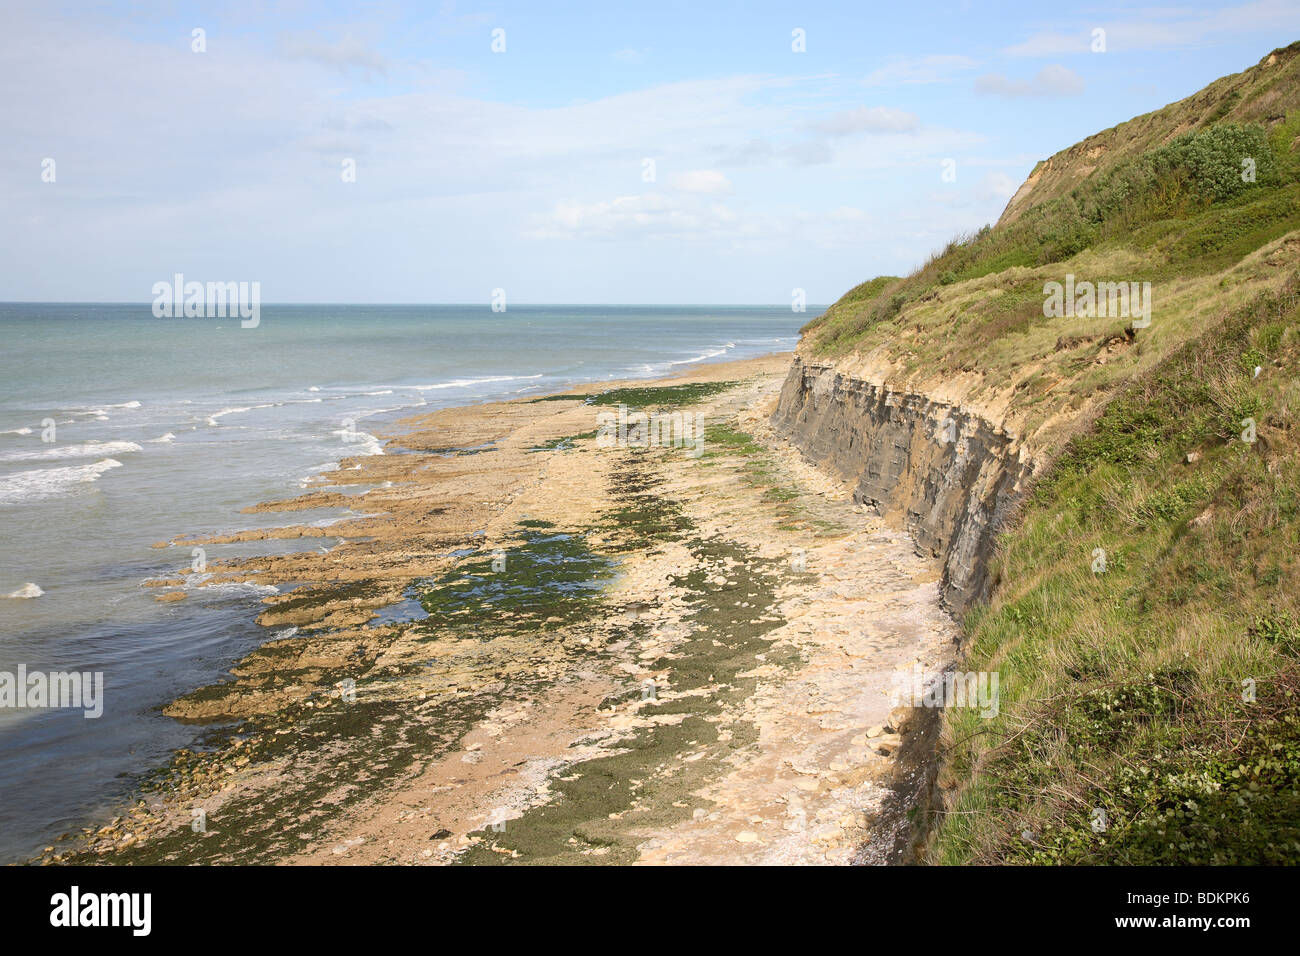 Cliffs and beach at Port-en-Bessin, Normandy, France. Stock Photo